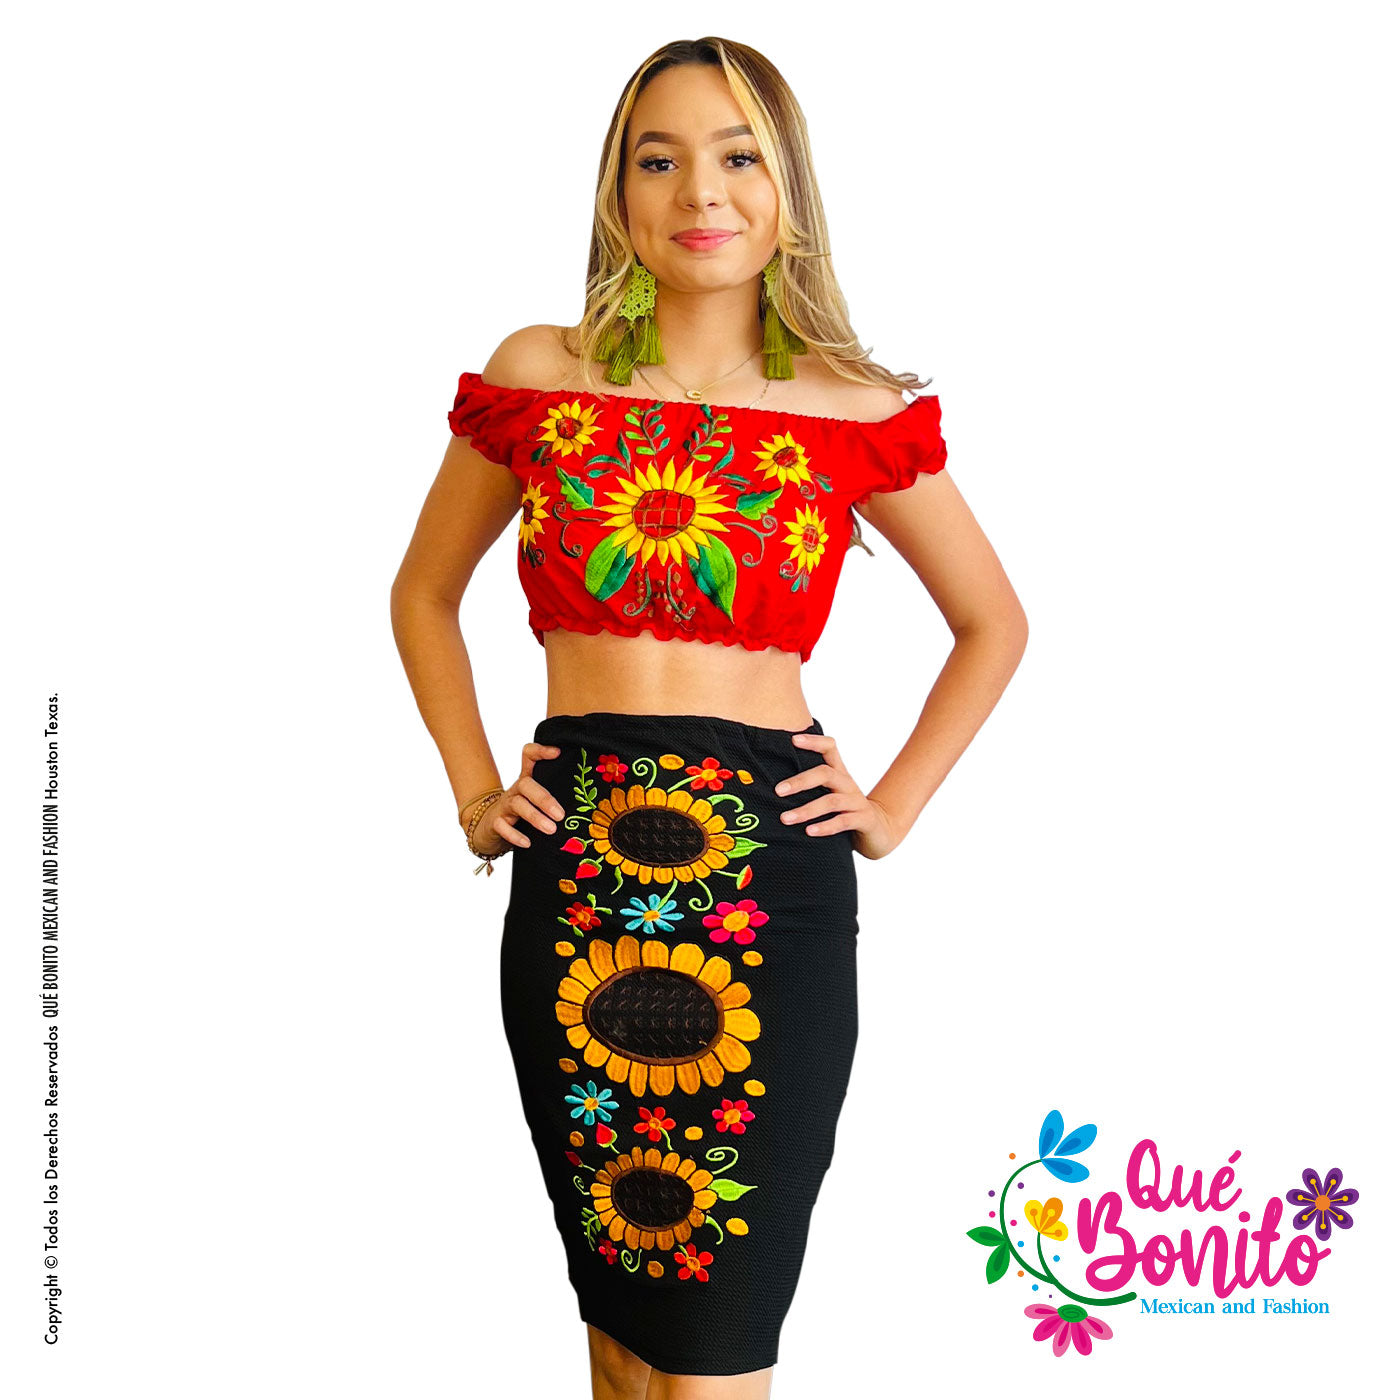 Sunflower Red Crop top Que Bonito Mexican and Fashion